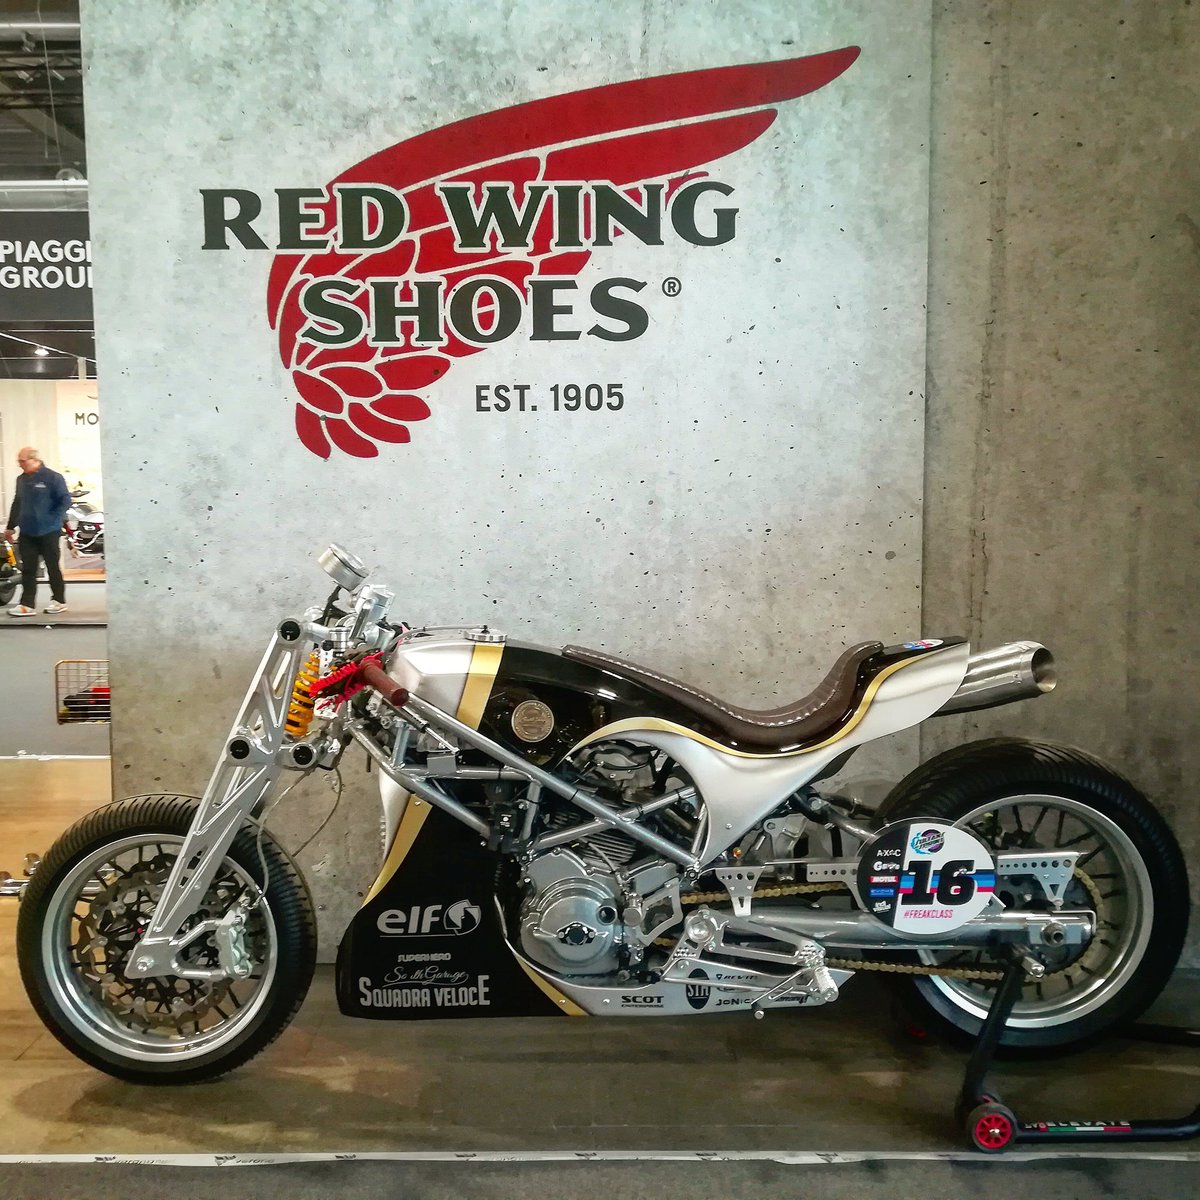 #MBE2020
#MotorBikeExpo #Verona #southgarage #sultansofsprint #redwing #caferacercult